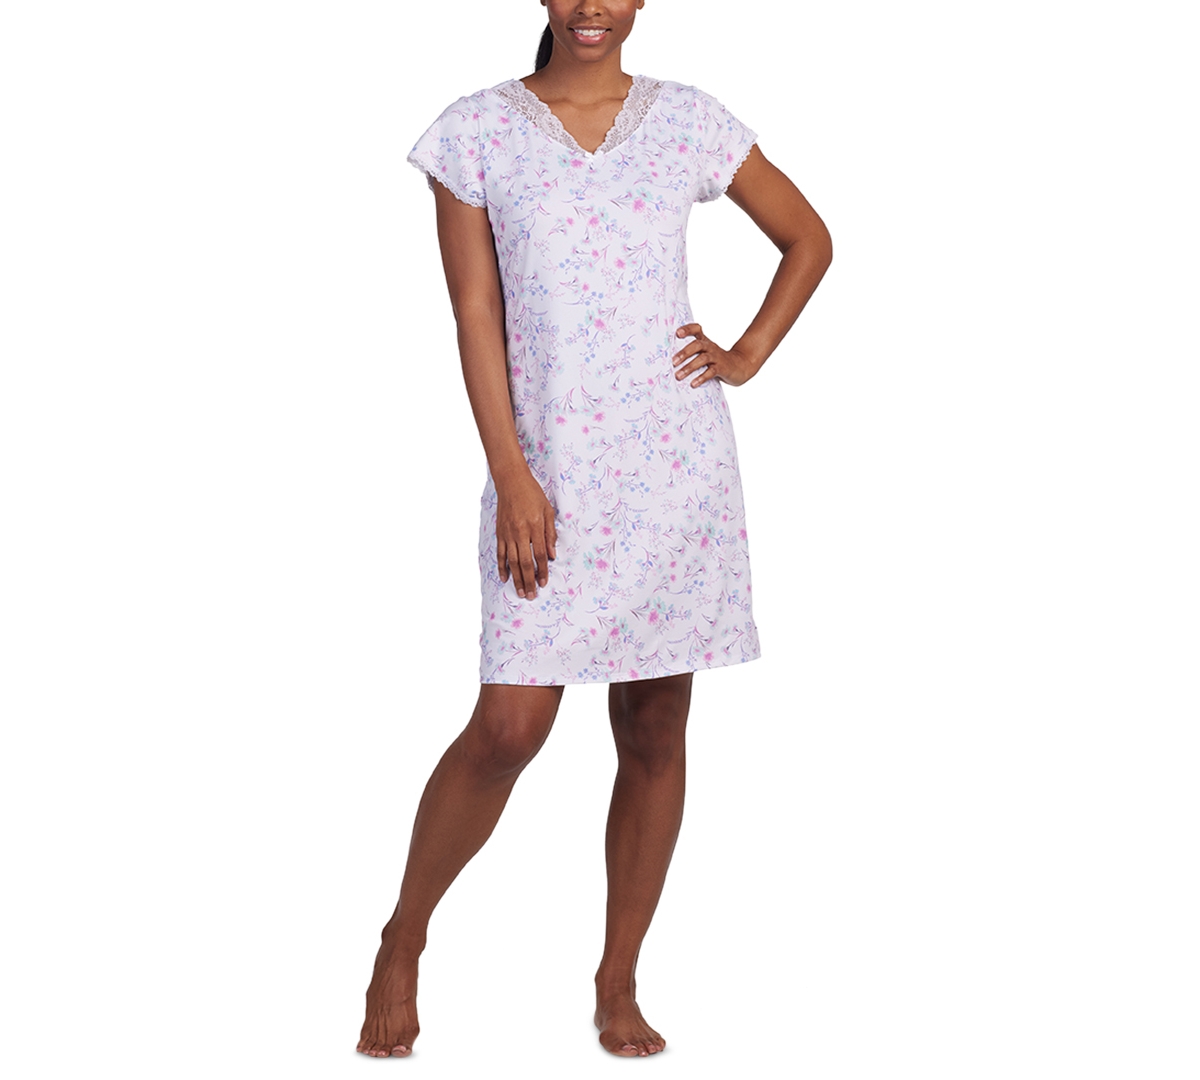 Women's Printed Lace-Trim Nightgown - Pink/lavender Floral